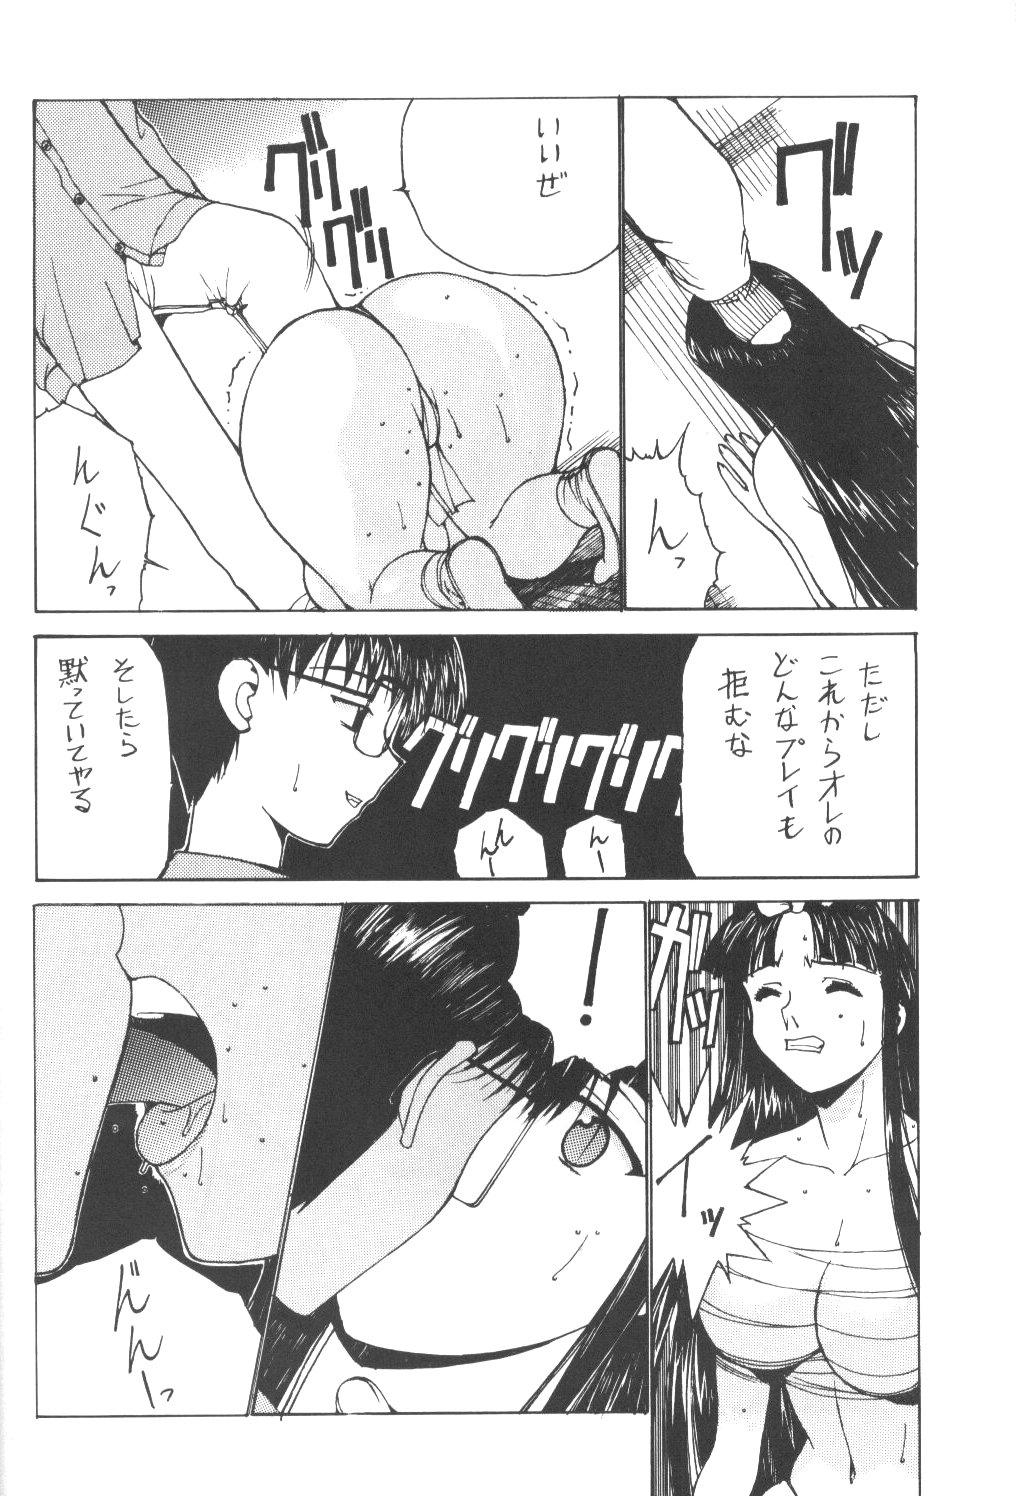 For Nadoriino Koufuku Ron - King of fighters Dead or alive Love hina Kitchen - Page 9